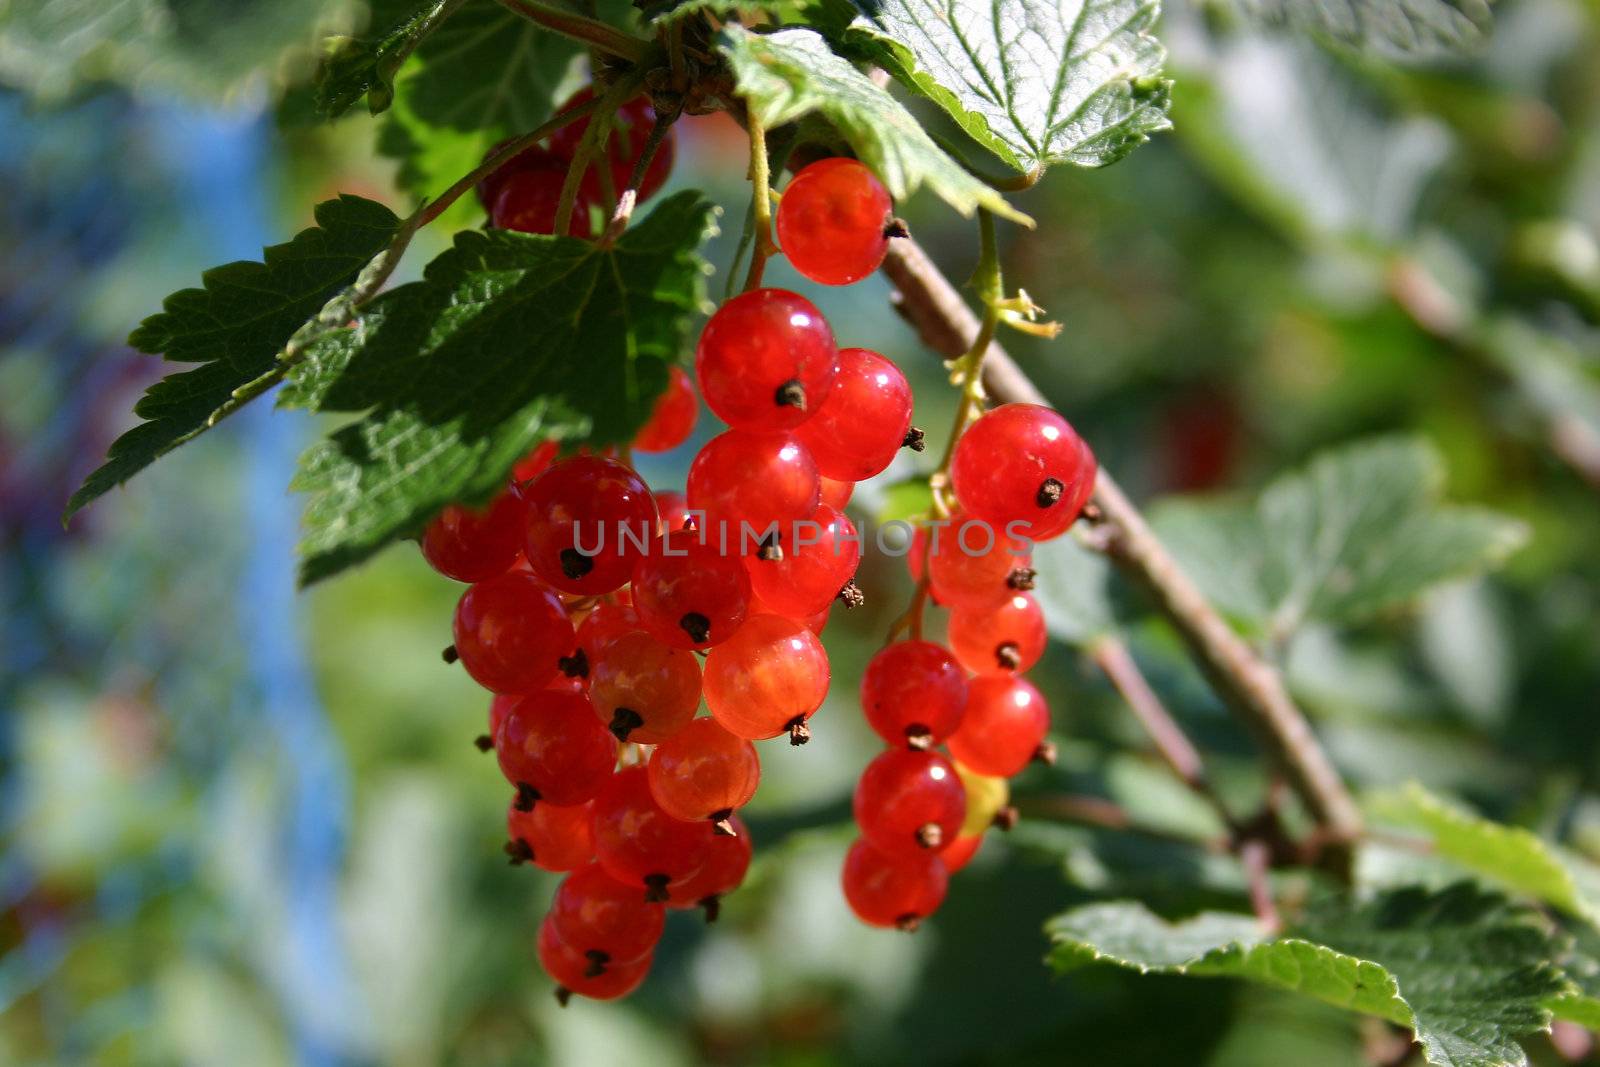 Cluster of redcurrants hanging from a bush